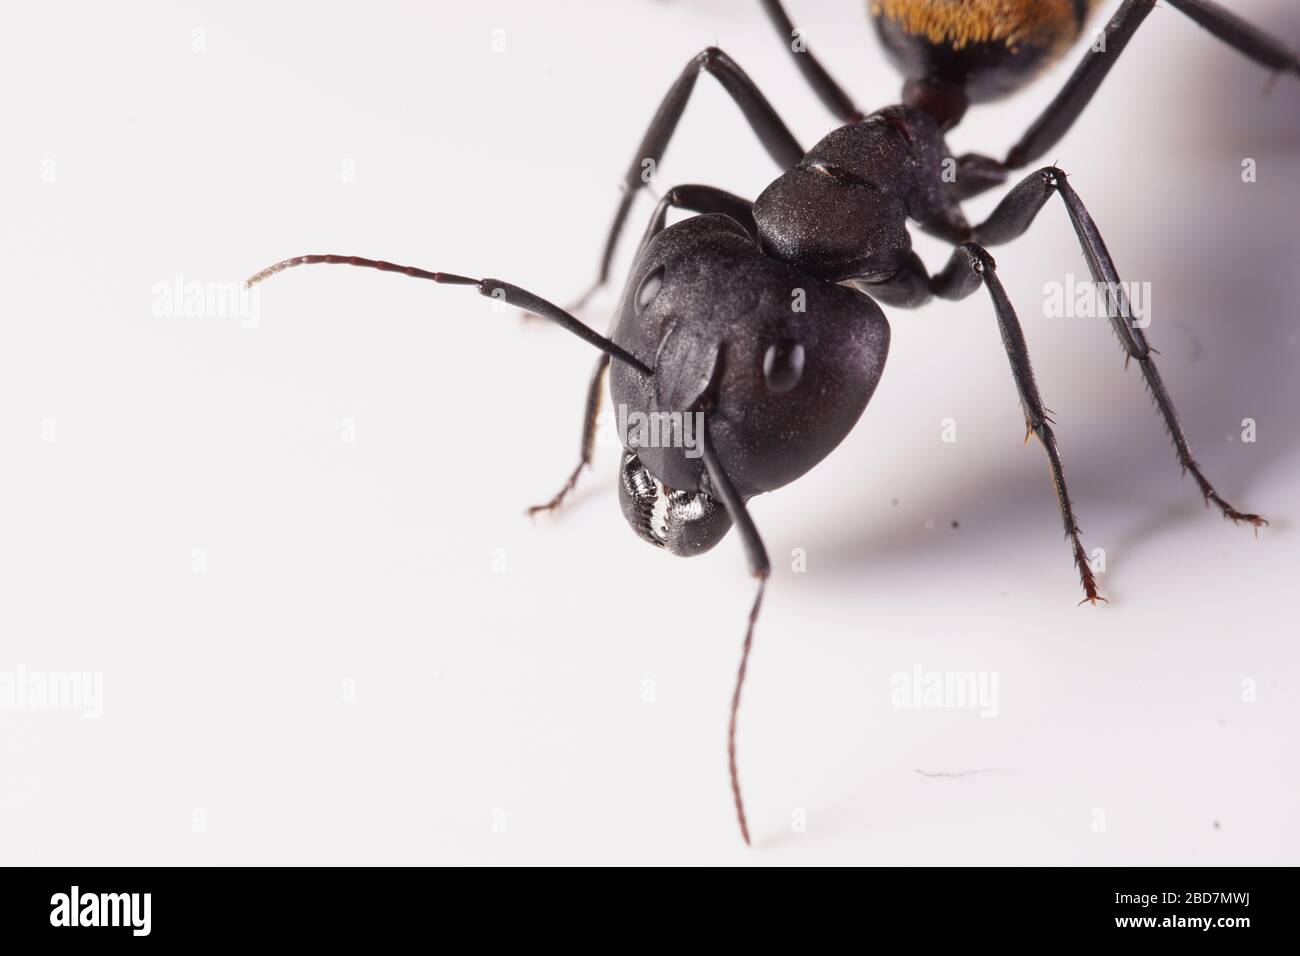 a larvae of the Australian bull ant Myrmecia pyriformis trying to build a cocoon while reflecting in the mirror. Stock Photo